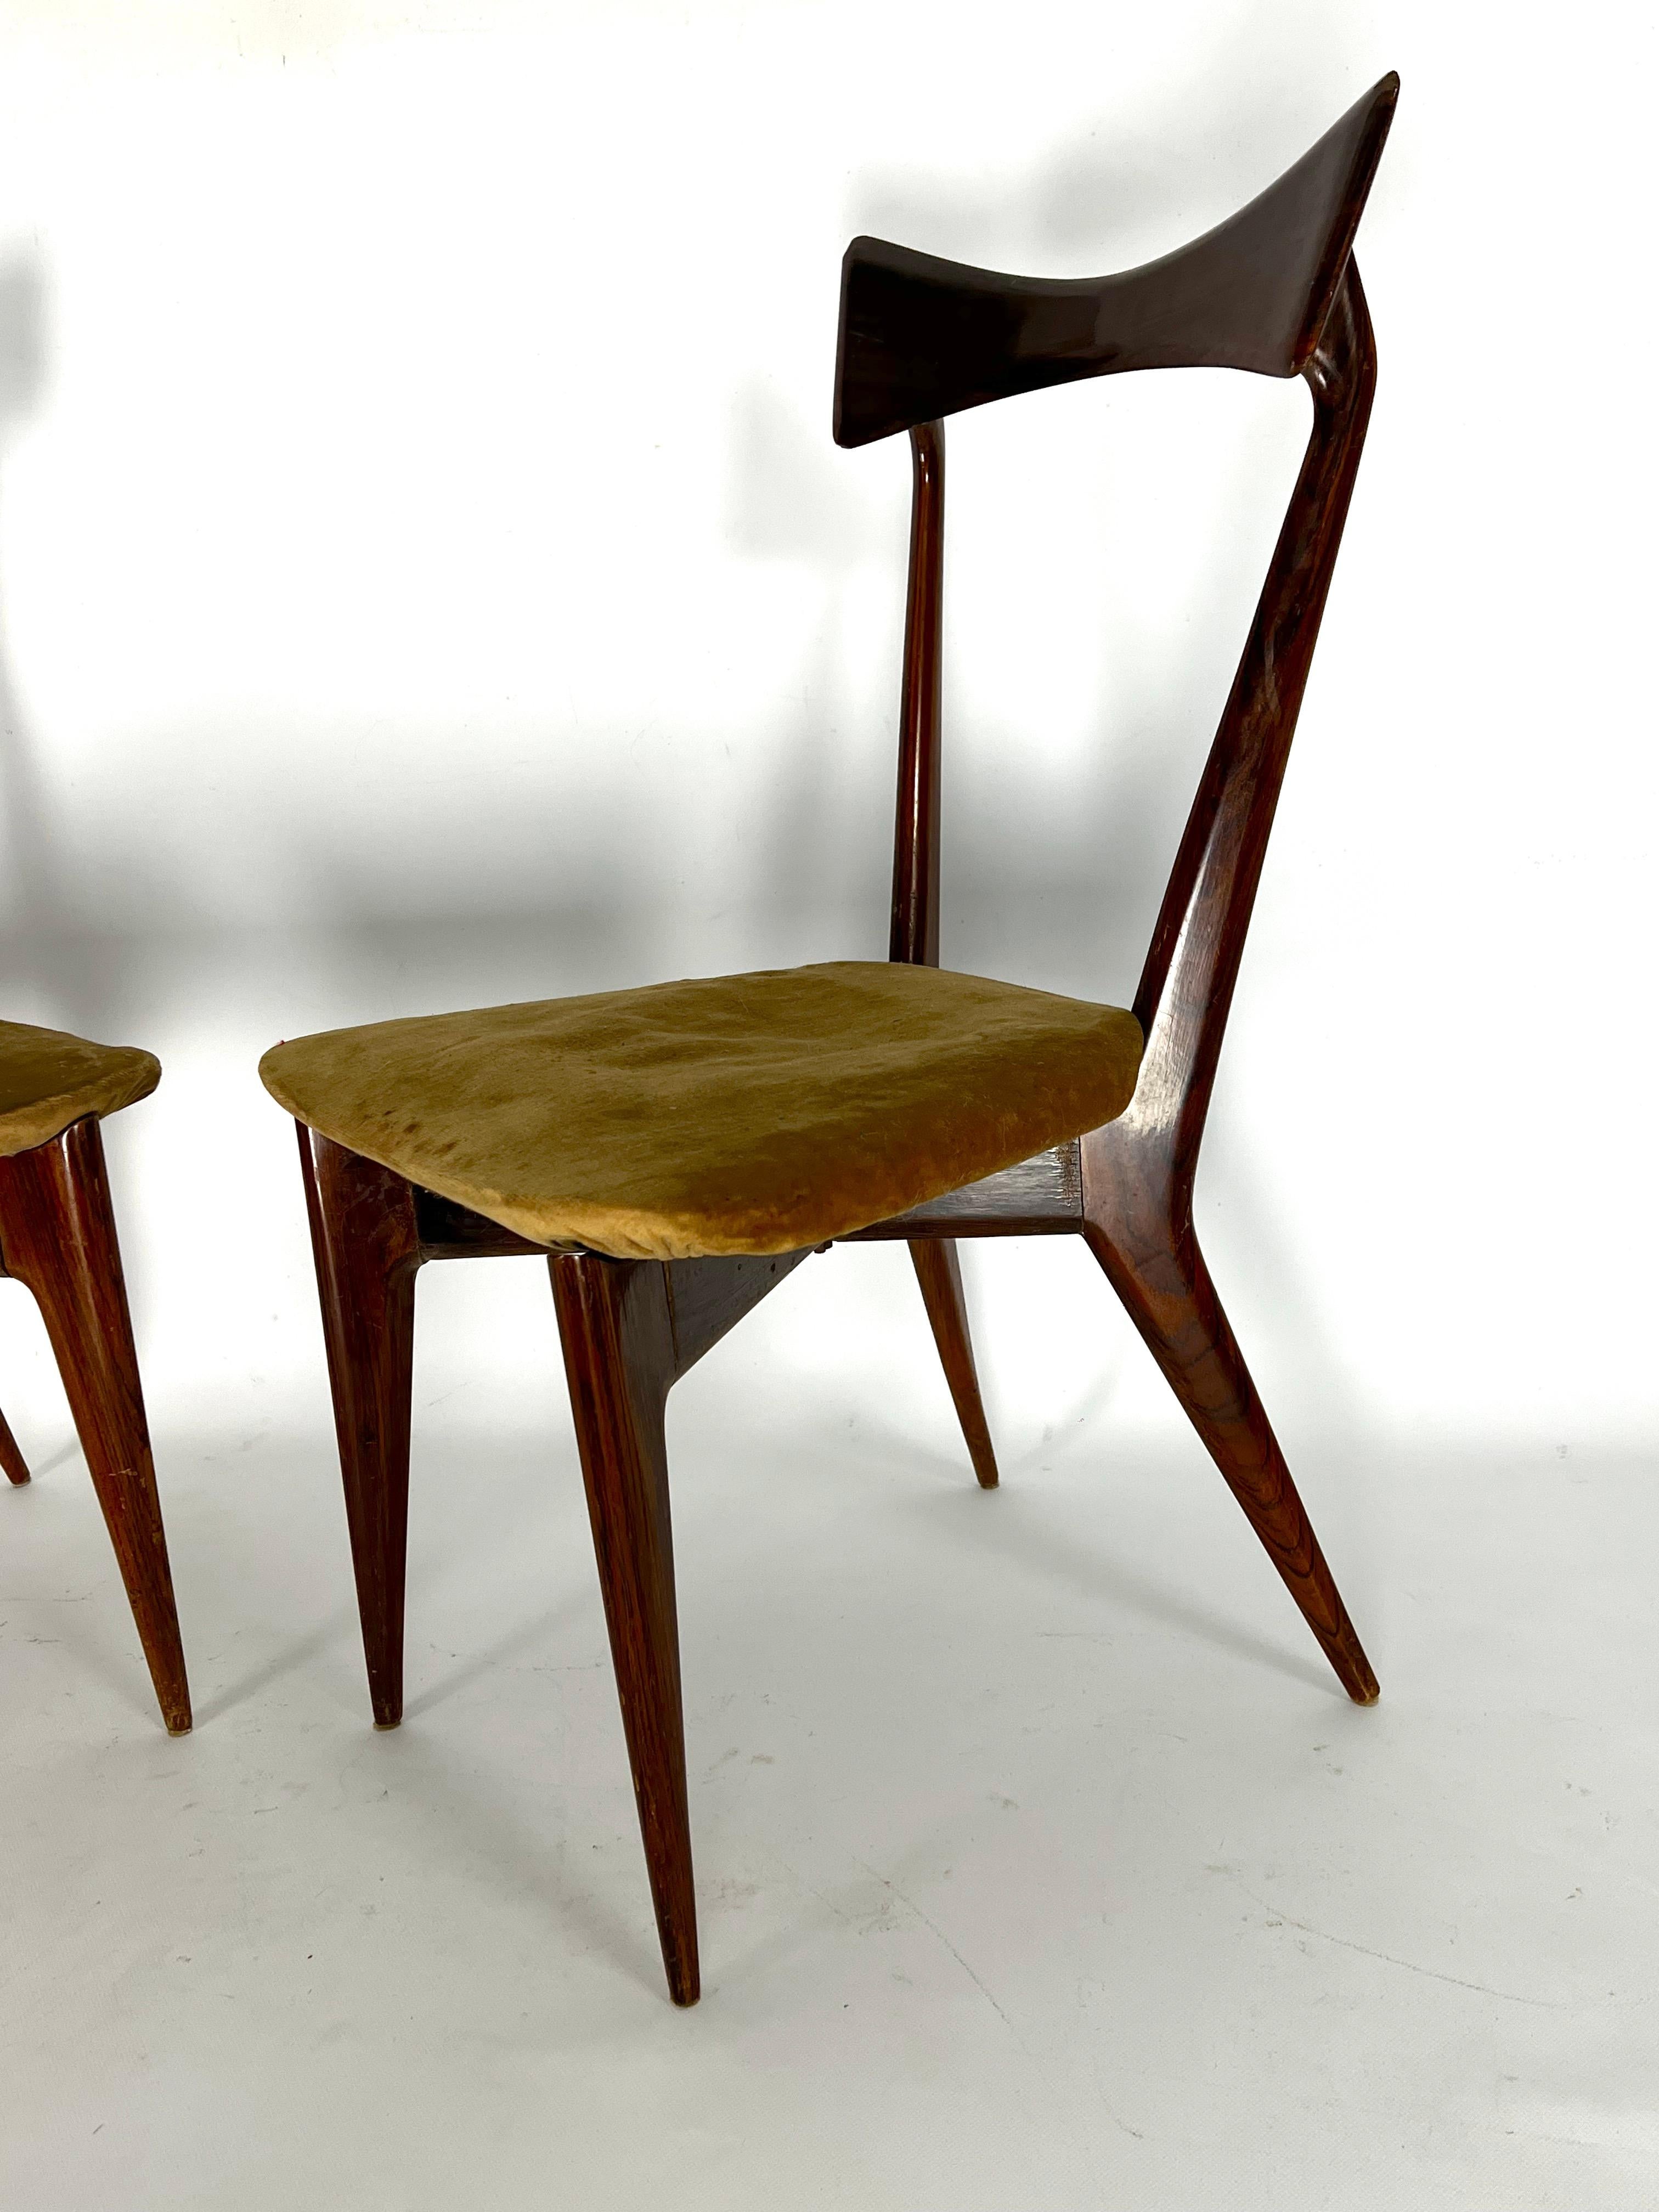 Wood Ico Parisi, set of five Butterfly chairs for Ariberto Colombo. Italy 1950s